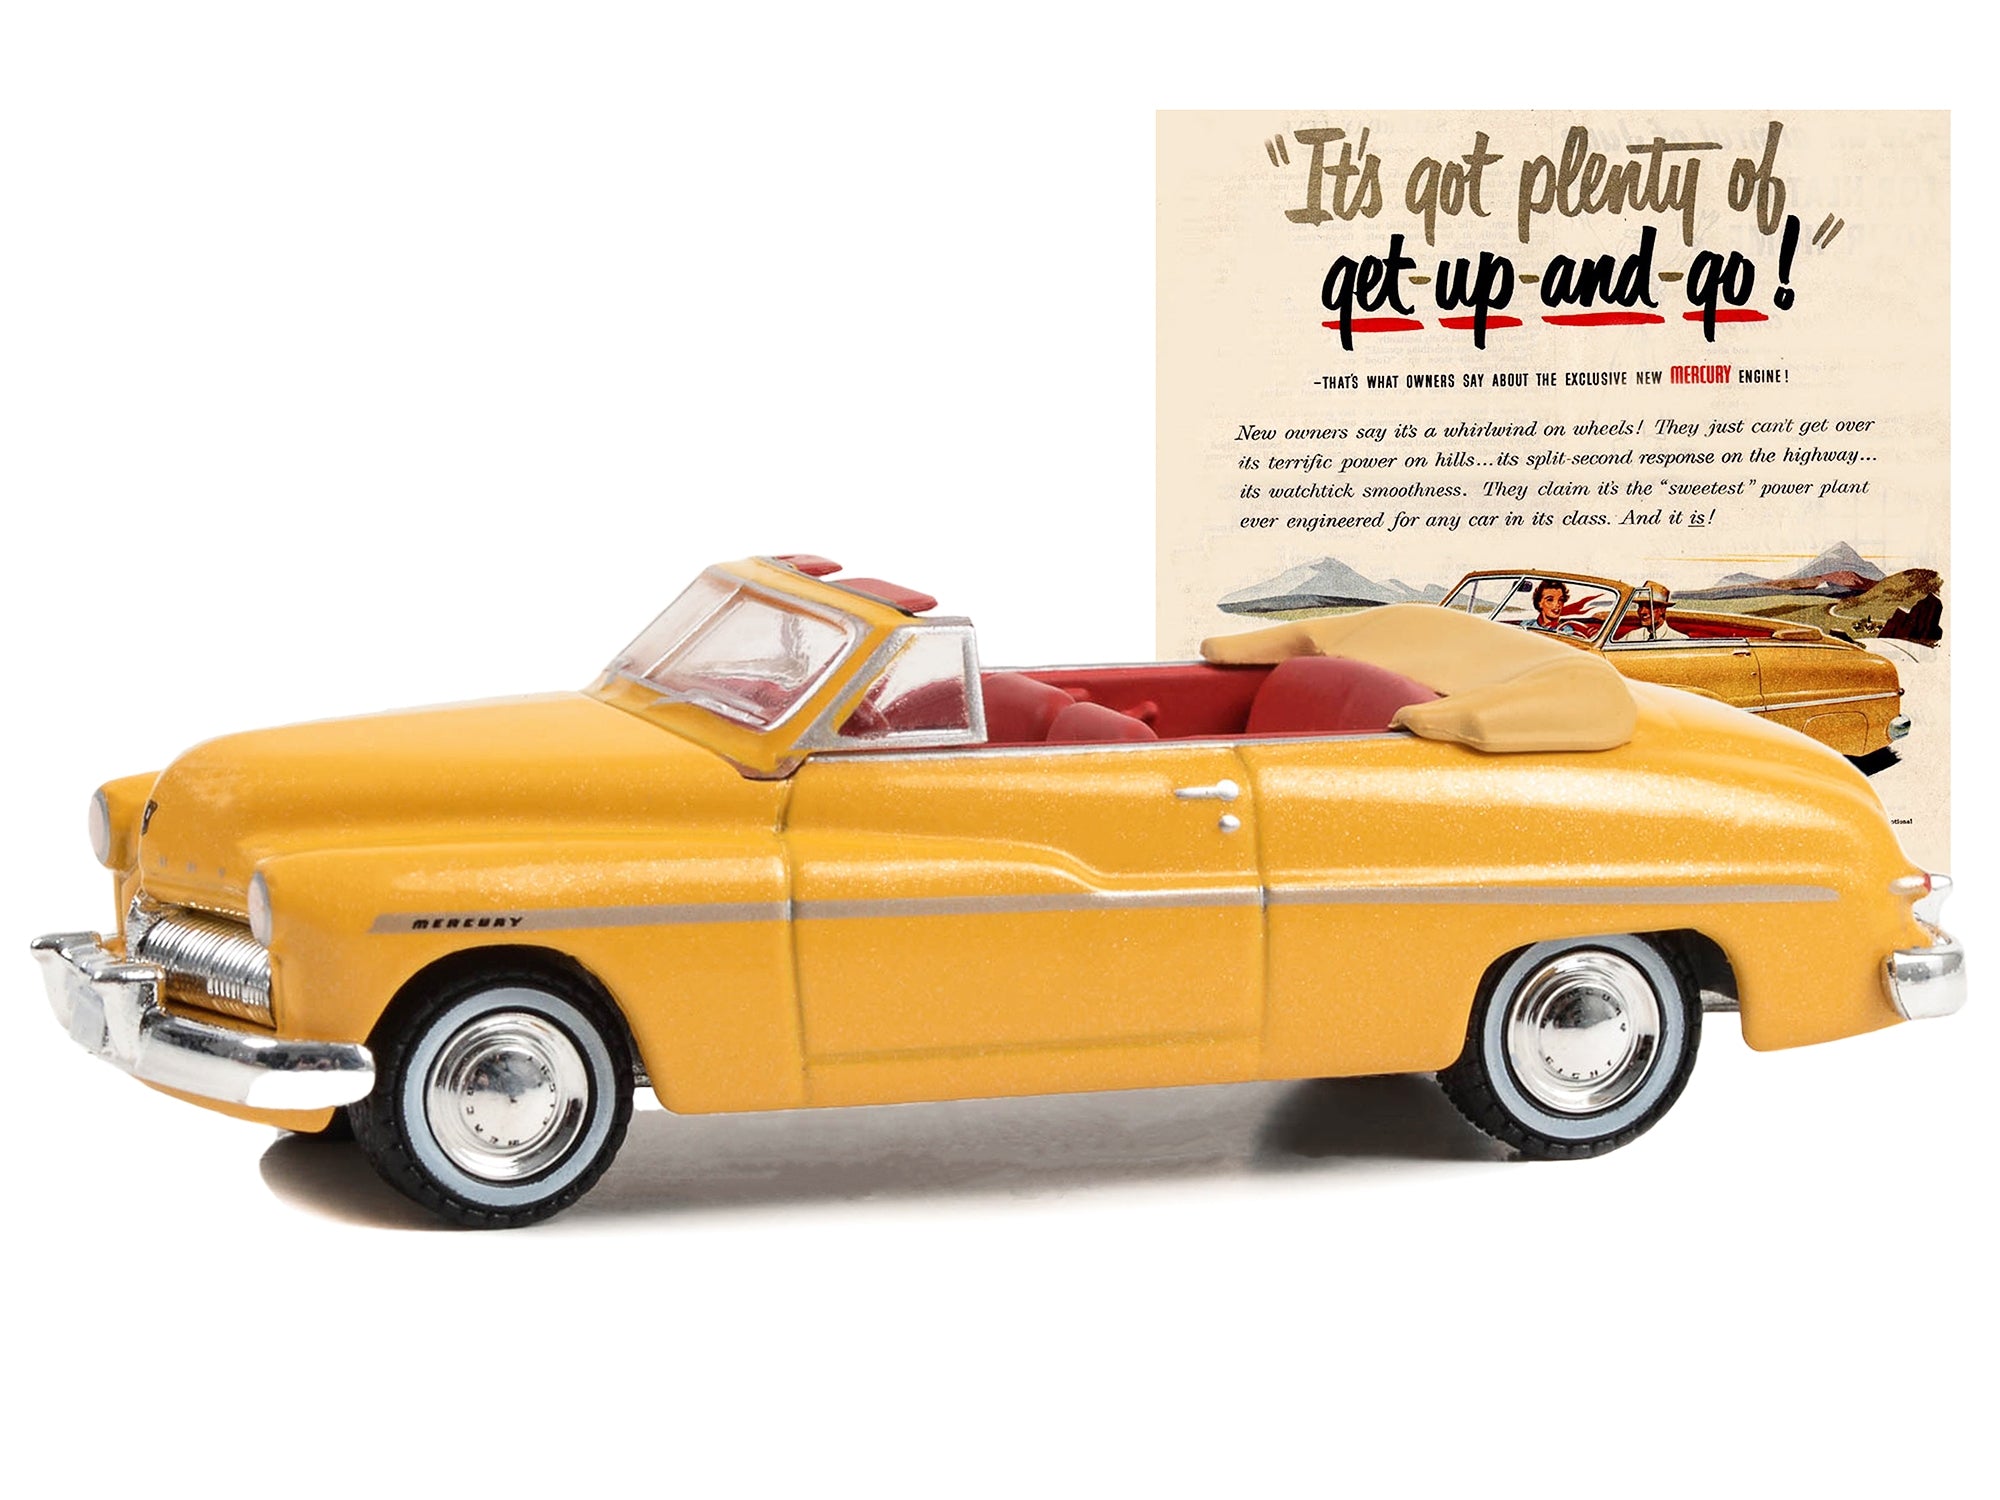 1949 Mercury Eight Convertible Yellow Metallic with Red Interior "It's Got Plenty Of Get-Up-And-Go!" "Vintage Ad Cars" Series 9 1/64 Diecast Model Car by Greenlight